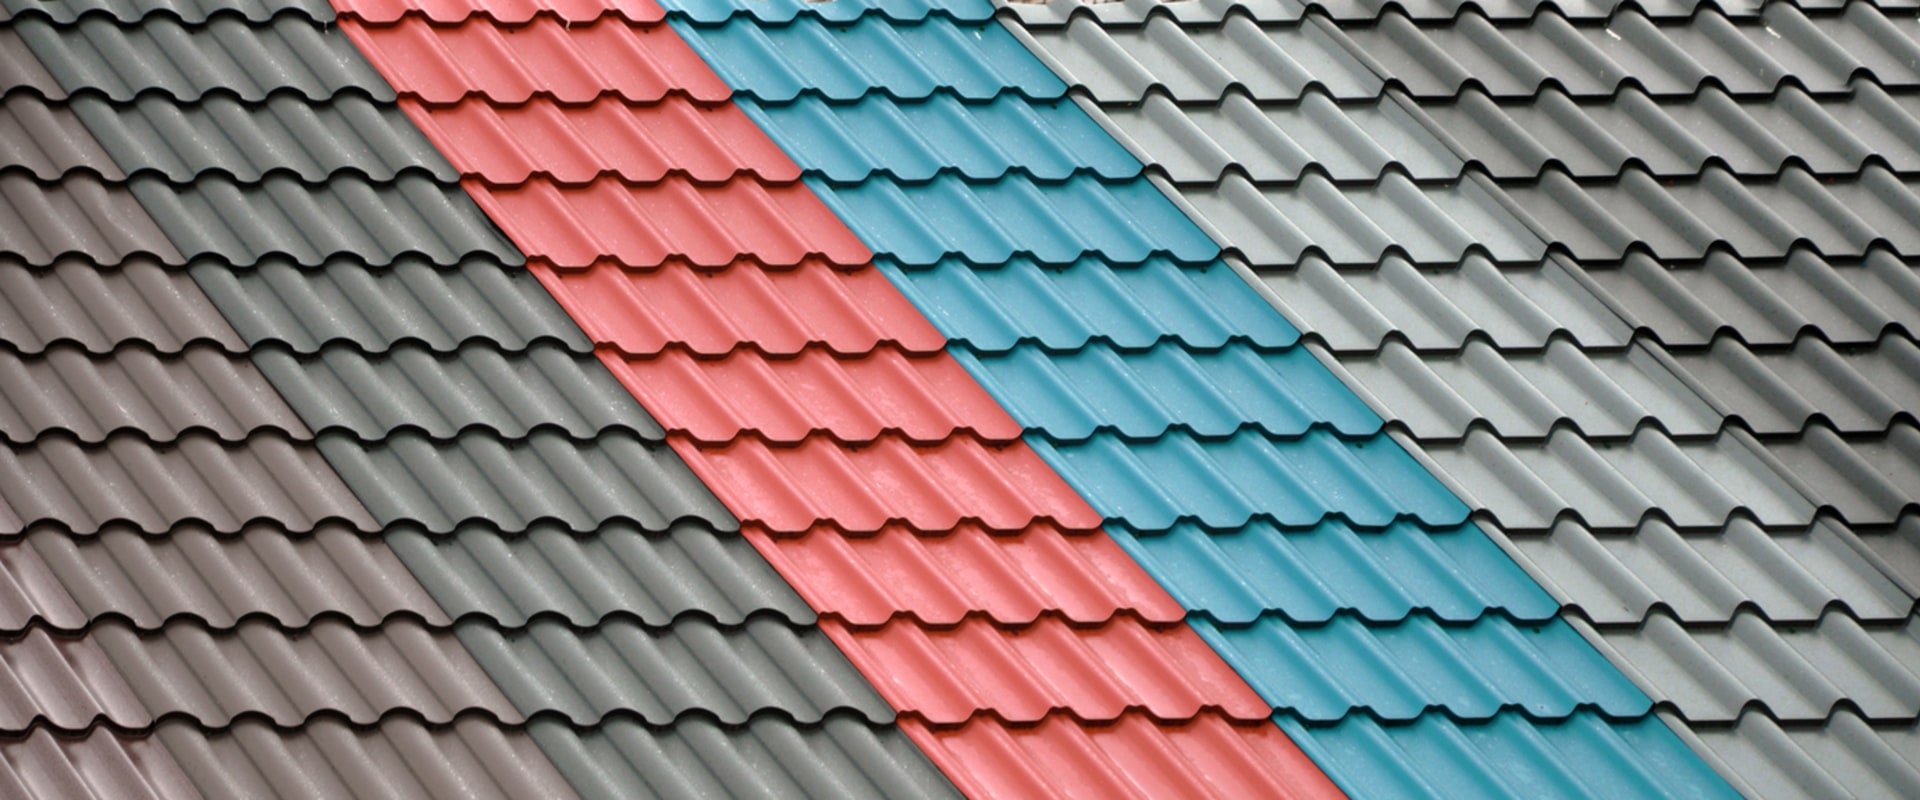 Which roof covering has the longest life expectancy?